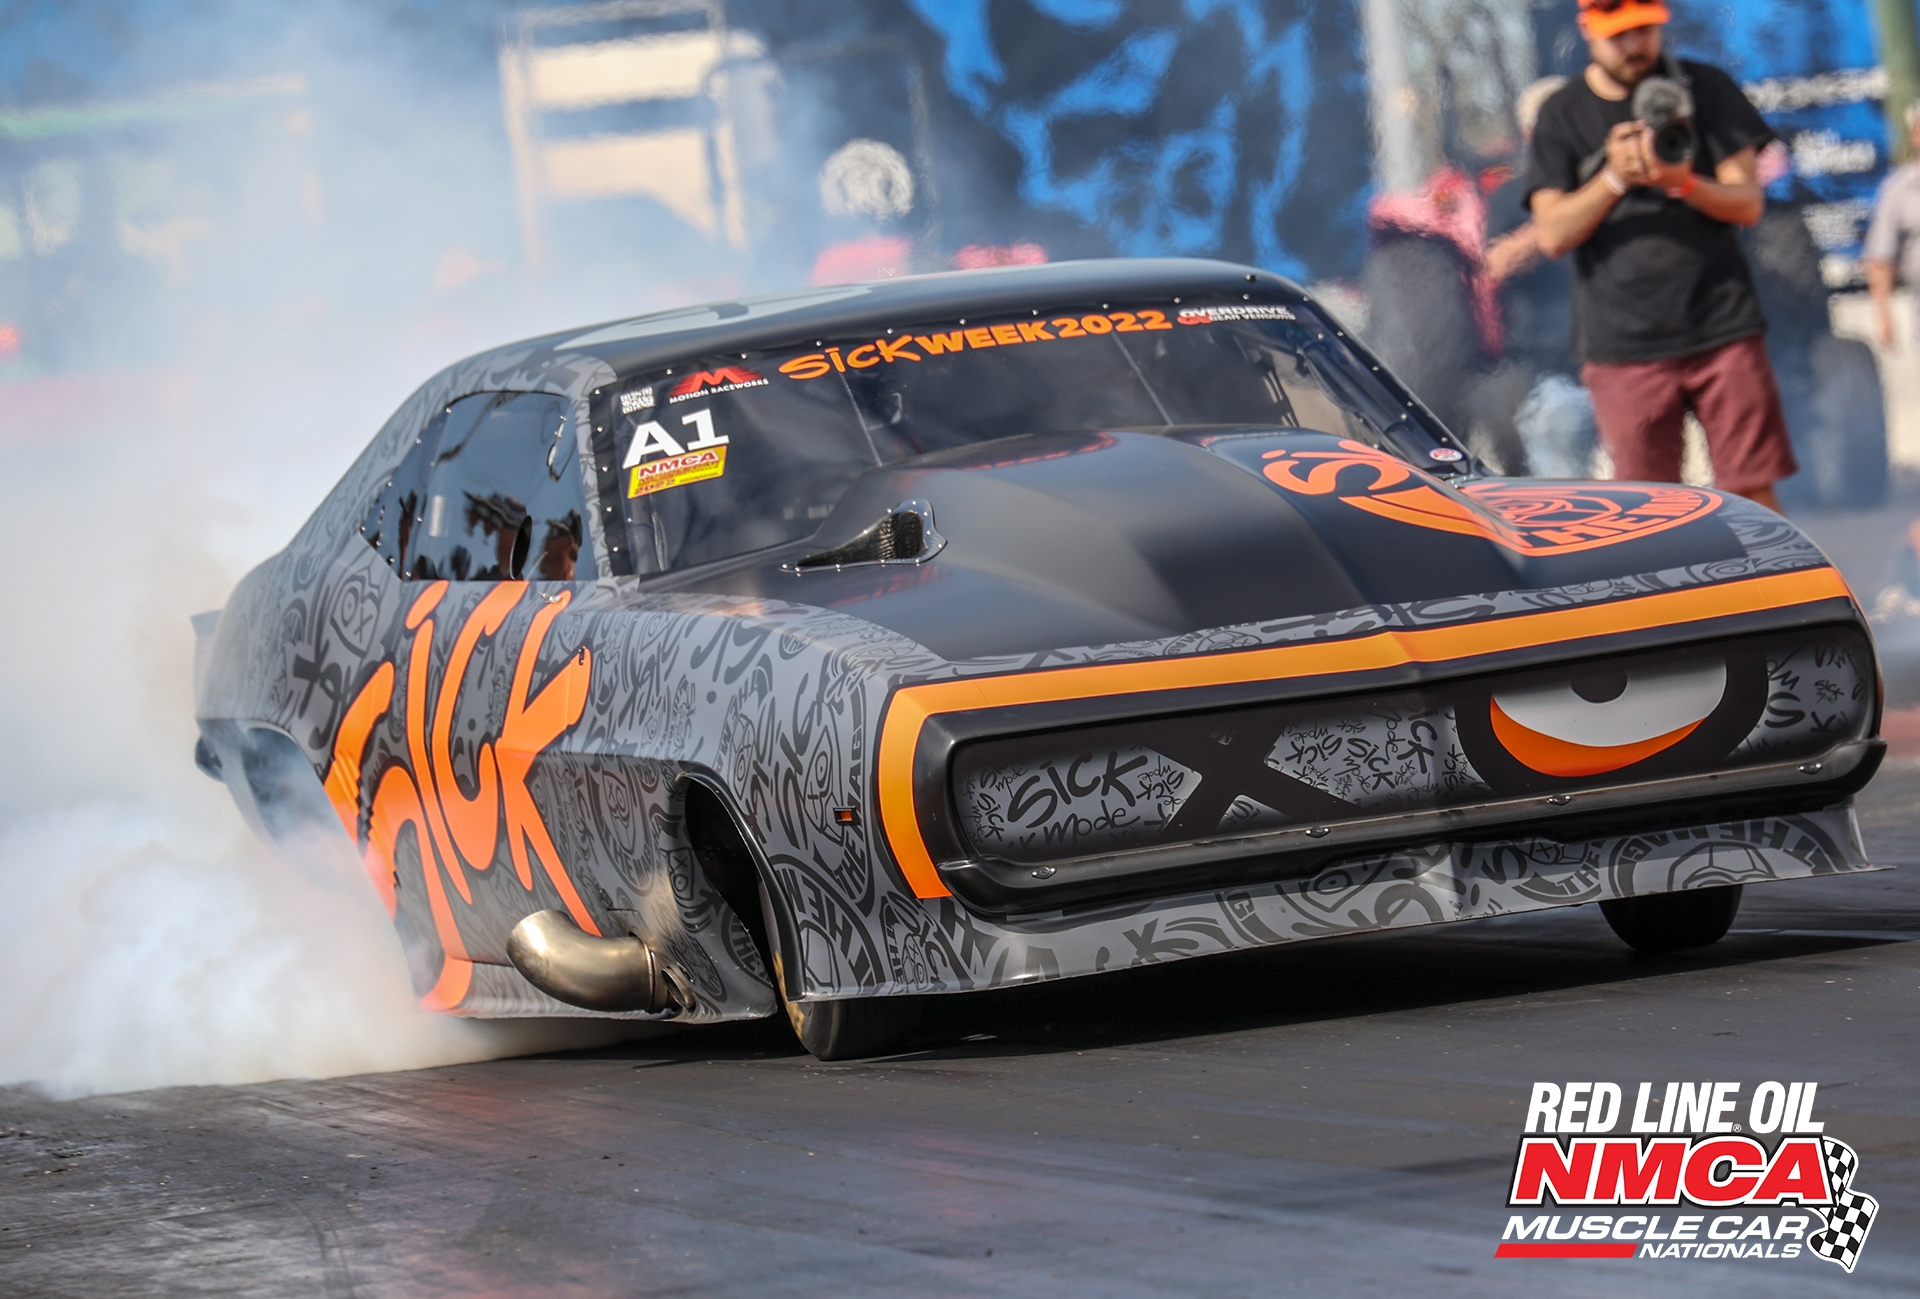 Sick the Magazine Drag & Drive Invitational presented by Gear Vendors is coming this summer to the NMCA event at US 131 Motorsports Park July 21-24, 2022.